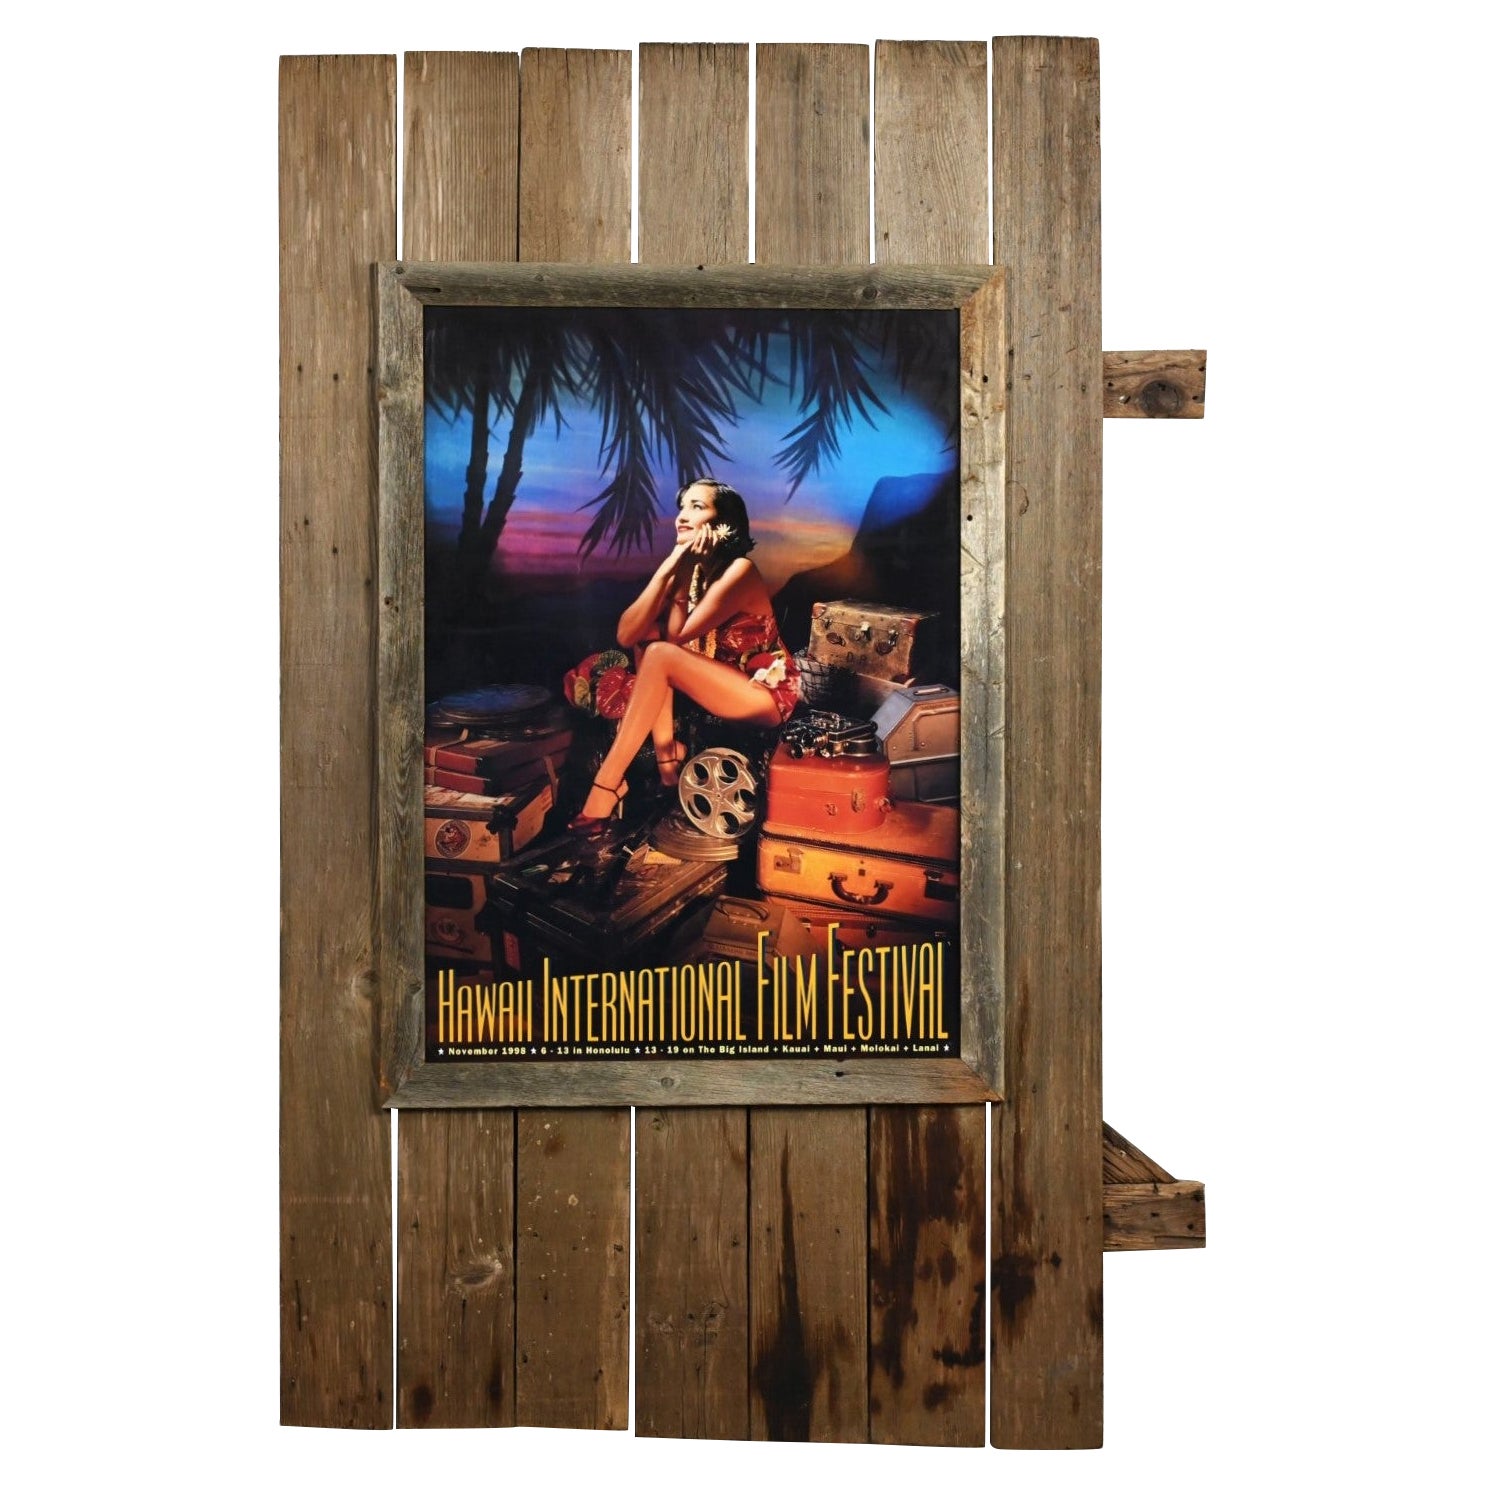 1998 Hawaii International Film Festival Movie Poster on Large Scale Rustic Wood  For Sale